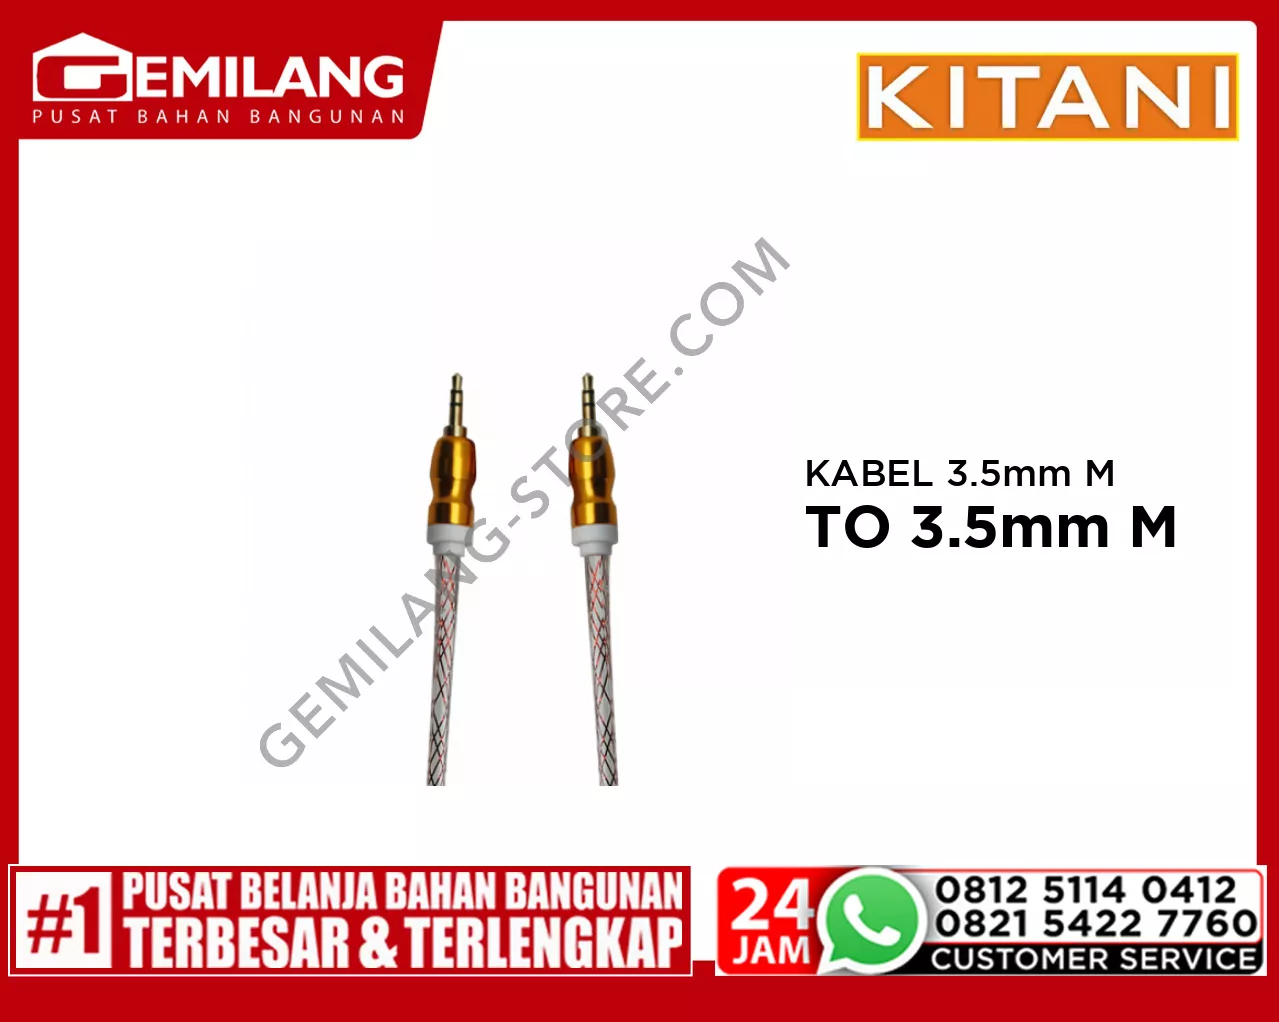 KITANI KABEL 3.5mm MALE STEREO TO 3.5mm MALE STRREO GOLD BESAR